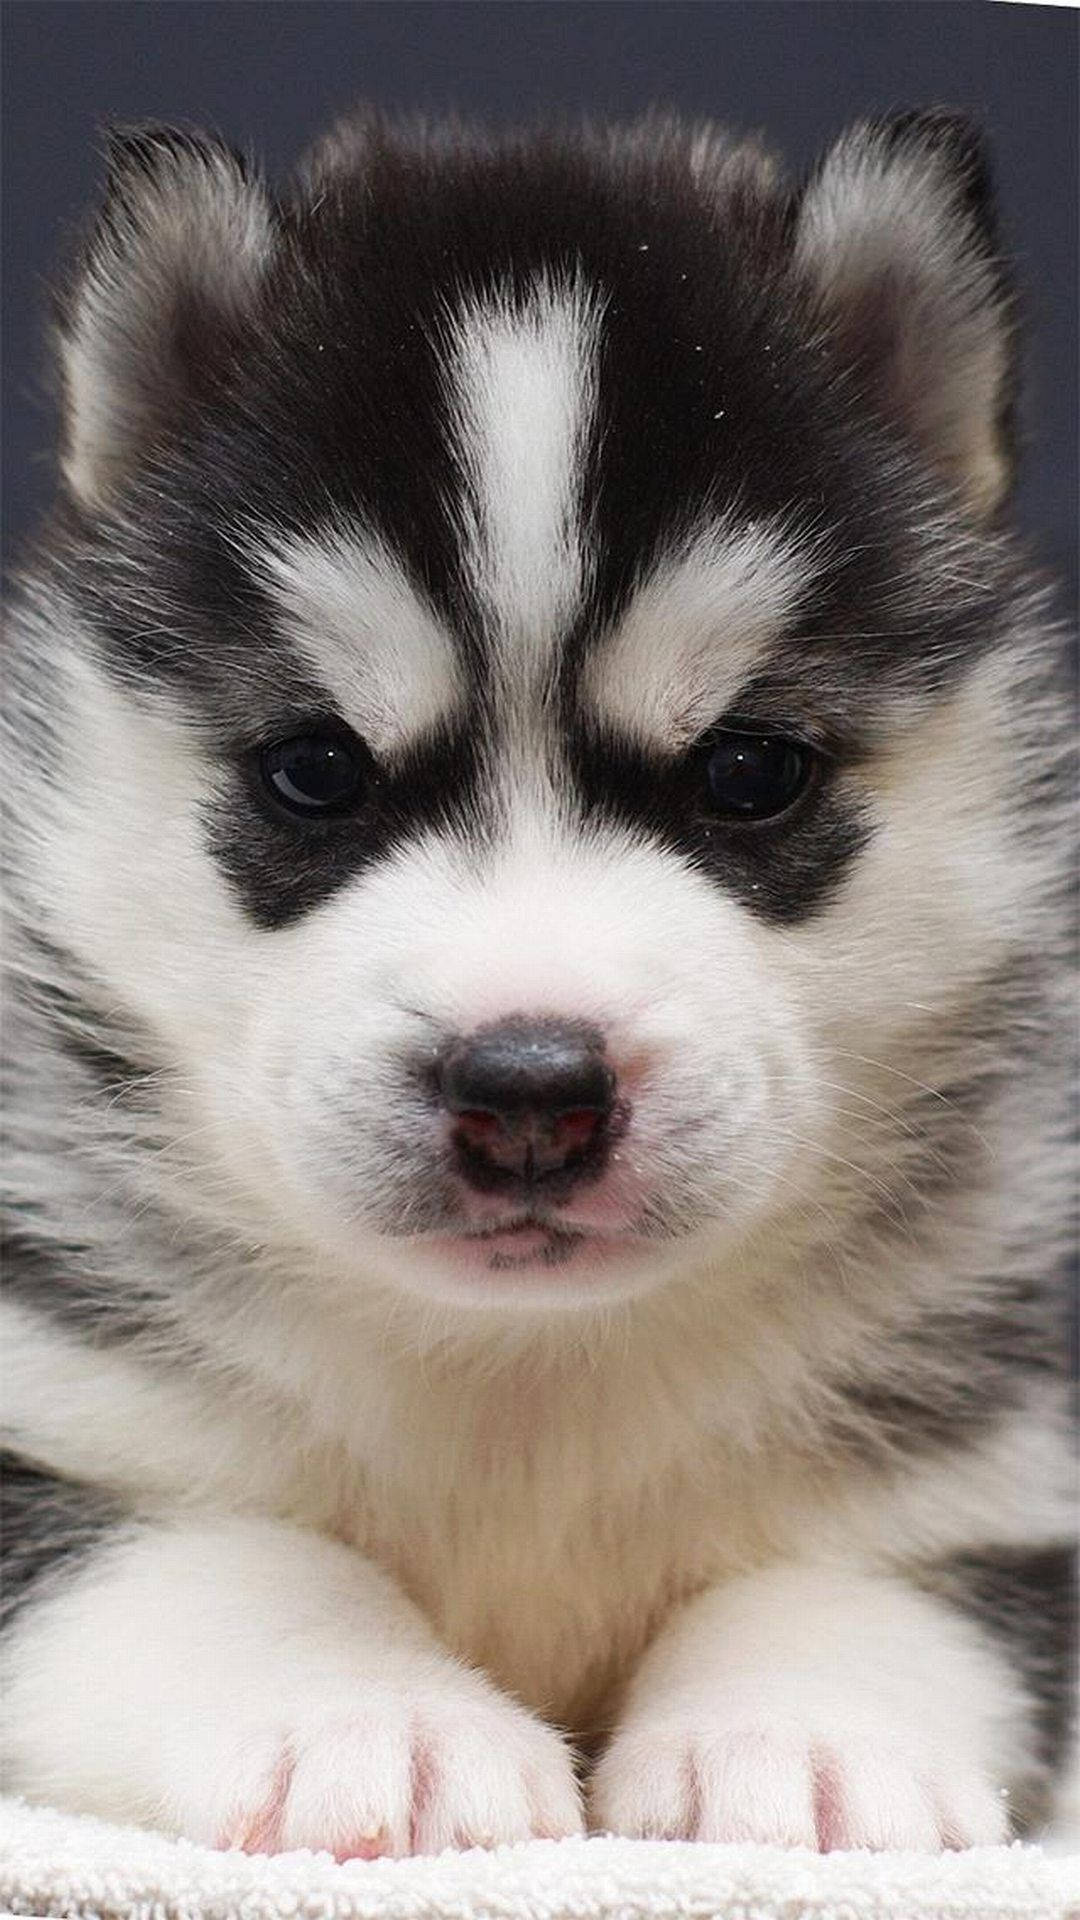 Husky Puppy And Paws Phone Wallpaper